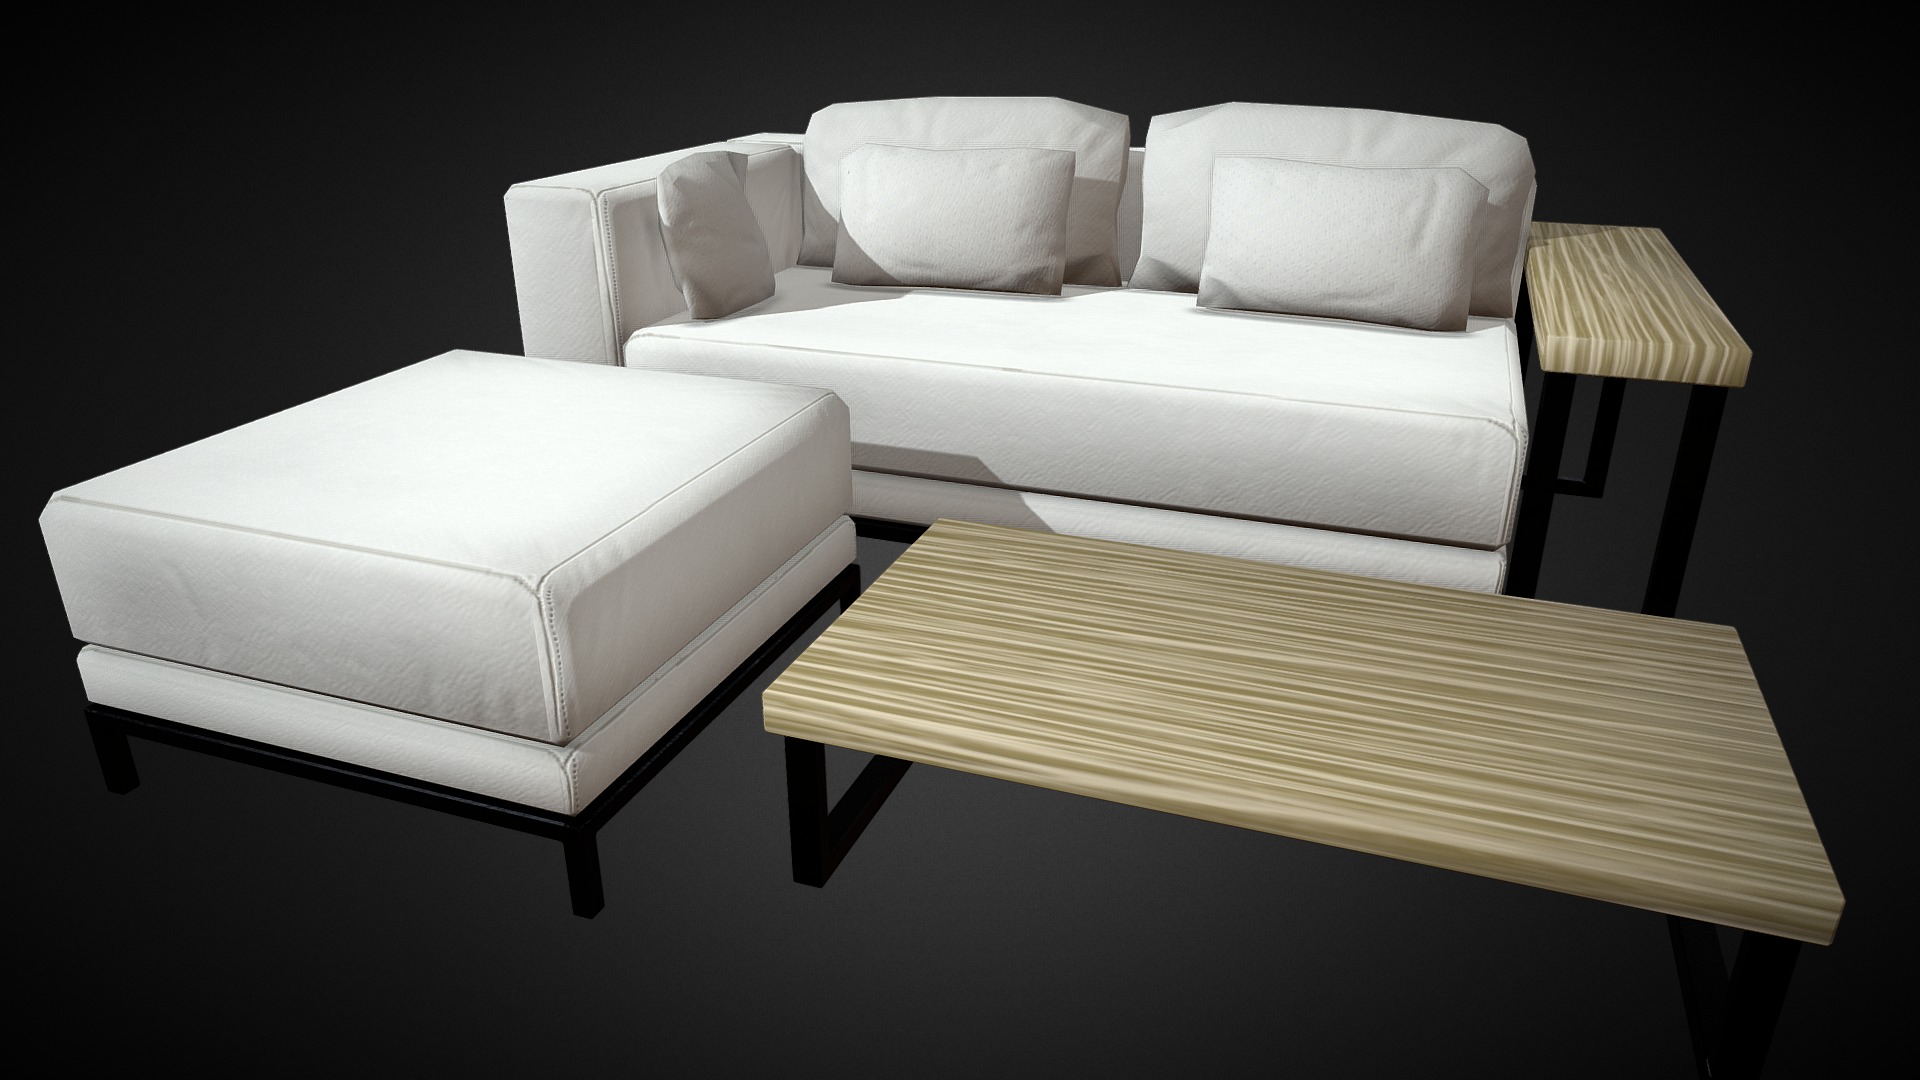 3D model Sofa Furniture Asset - This is a 3D model of the Sofa Furniture Asset. The 3D model is about a couple of white couches.